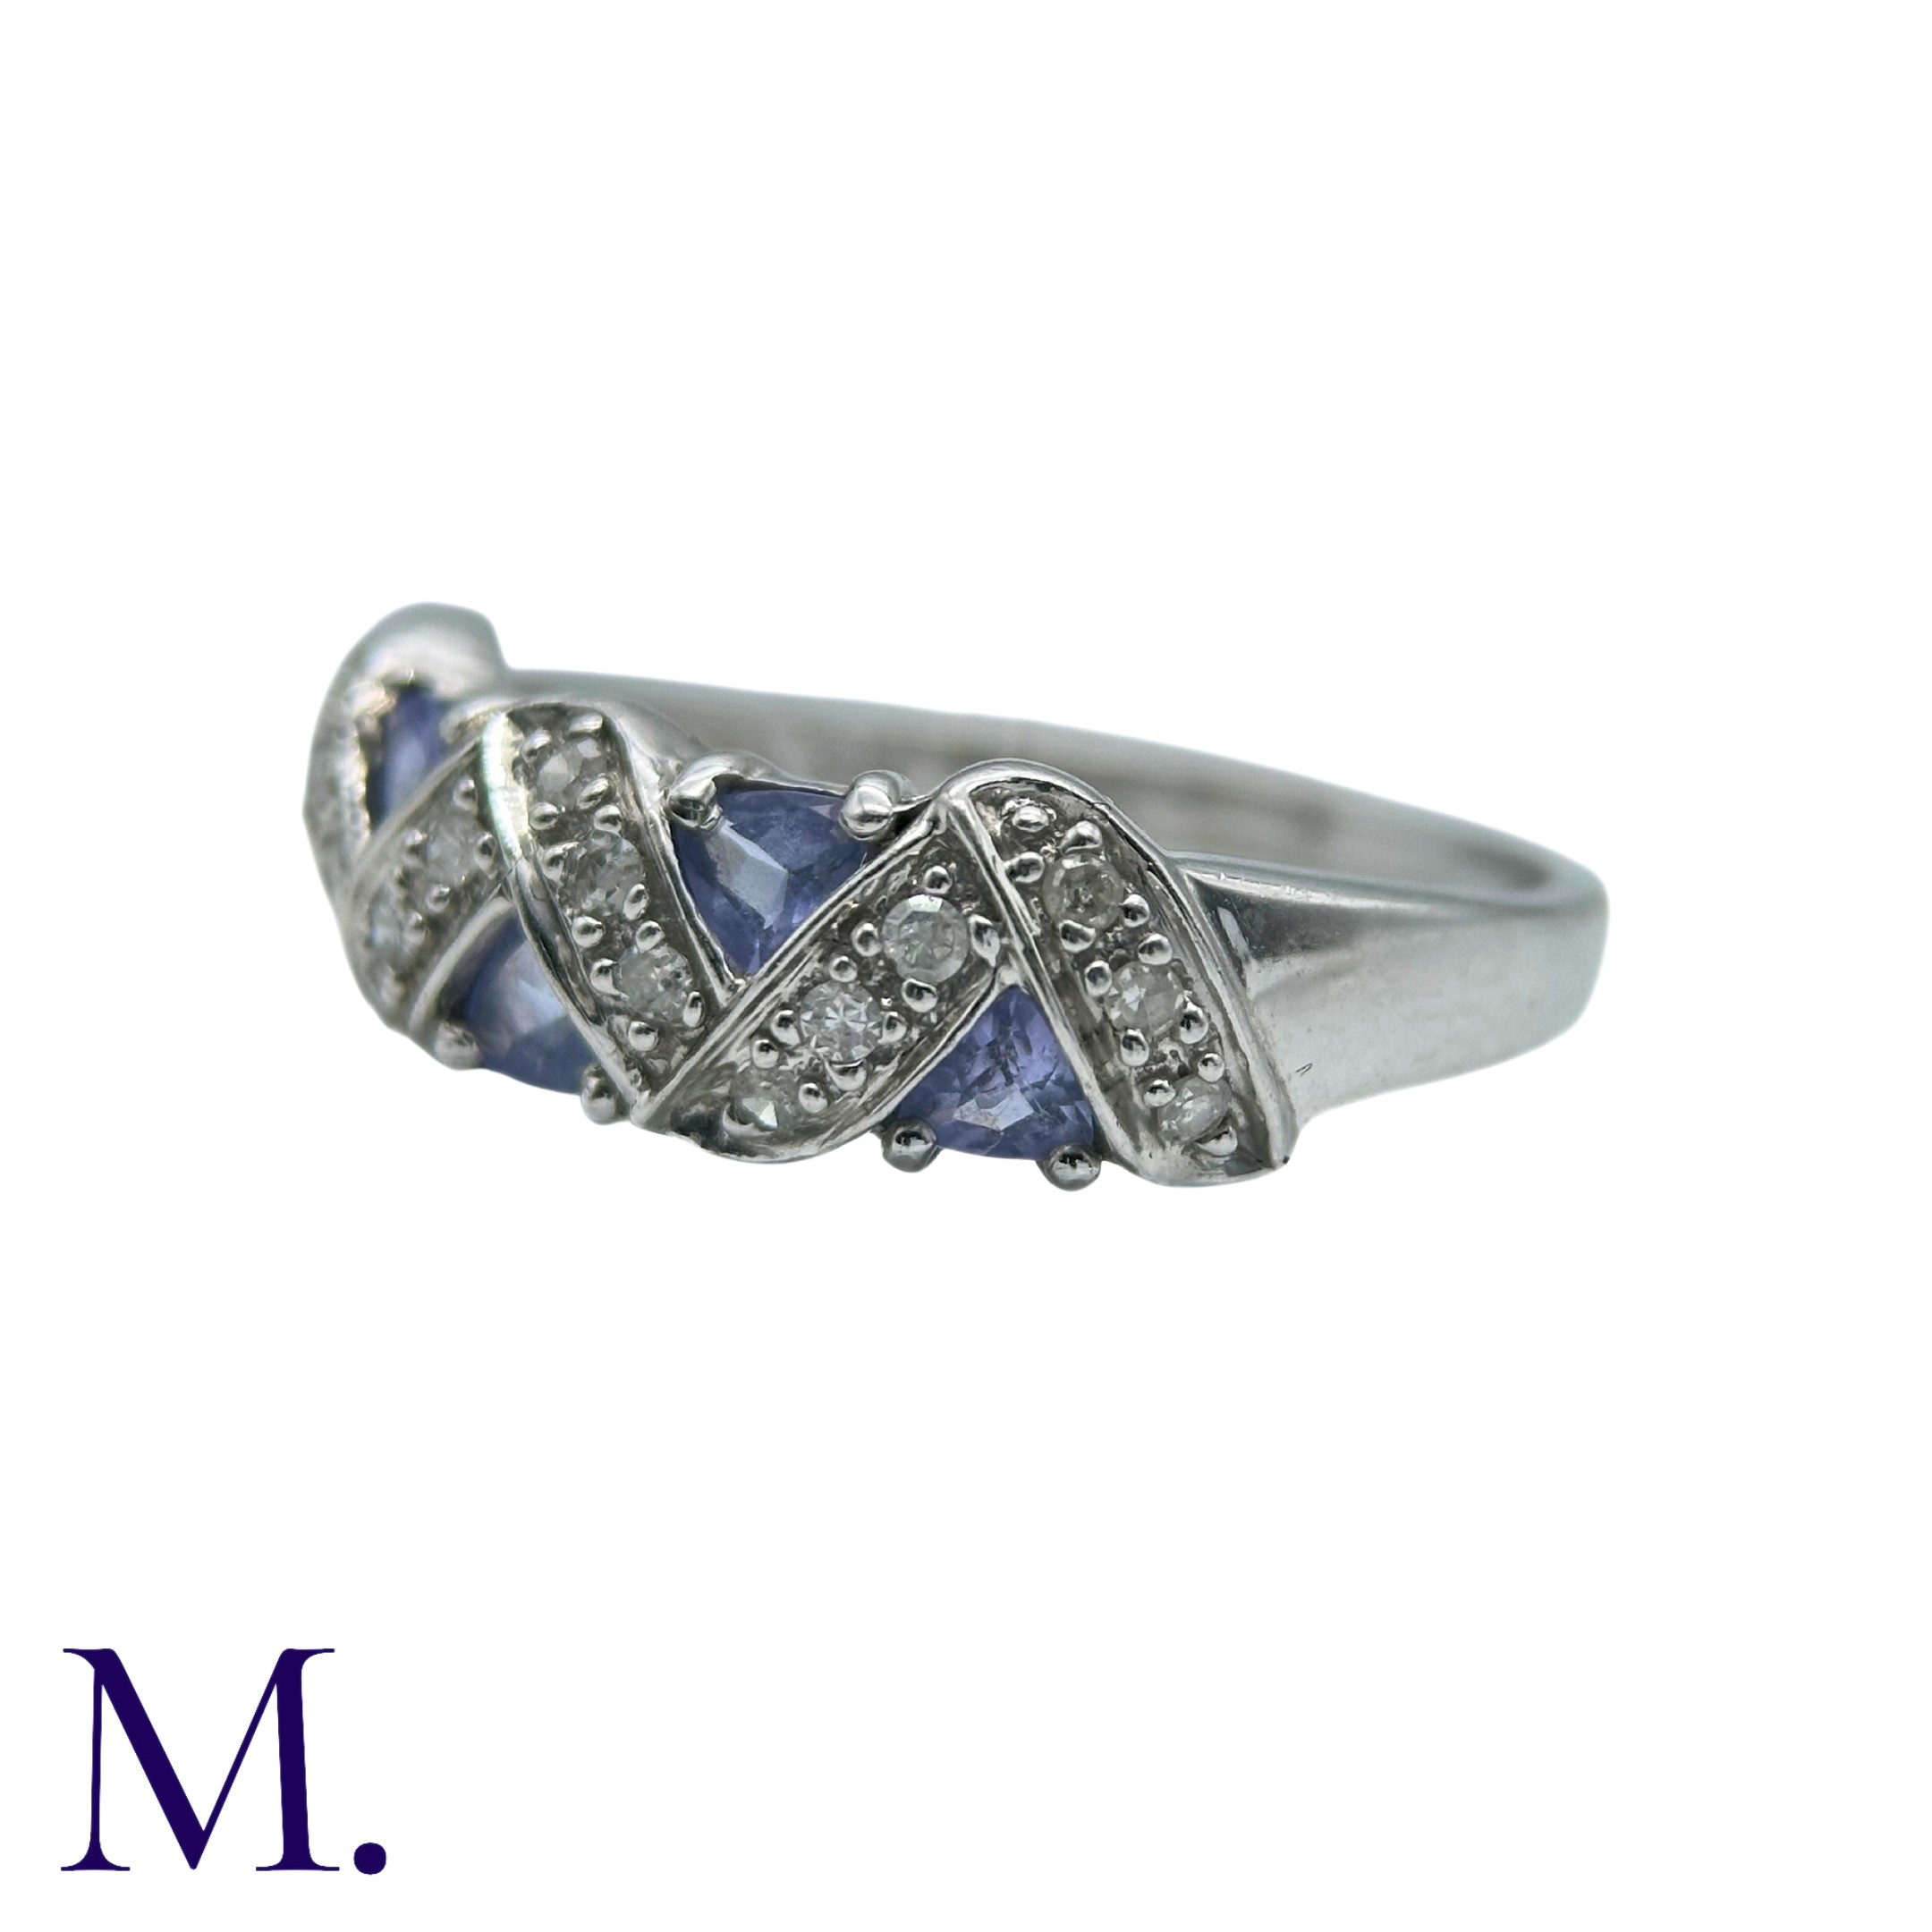 A Tanzanite And Diamond Ring in 9k white gold, set with trillion cut tanzanites and round cut - Image 3 of 4